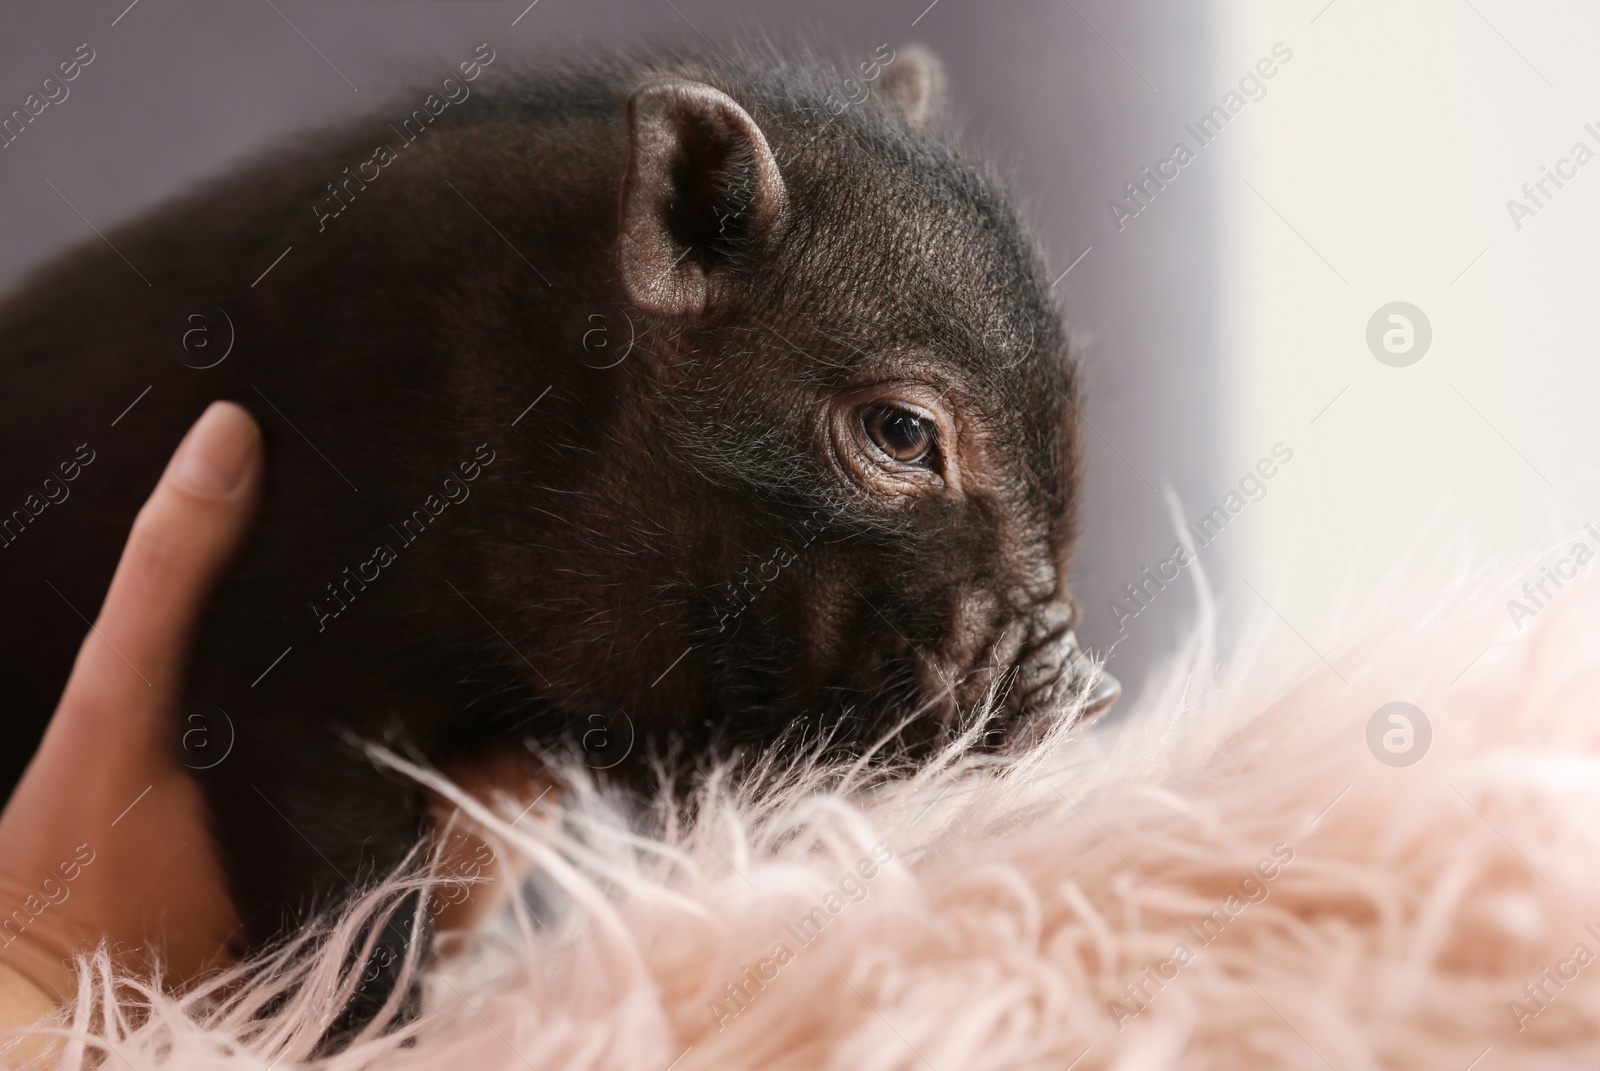 Photo of Woman with cute mini pig on sofa at home, closeup